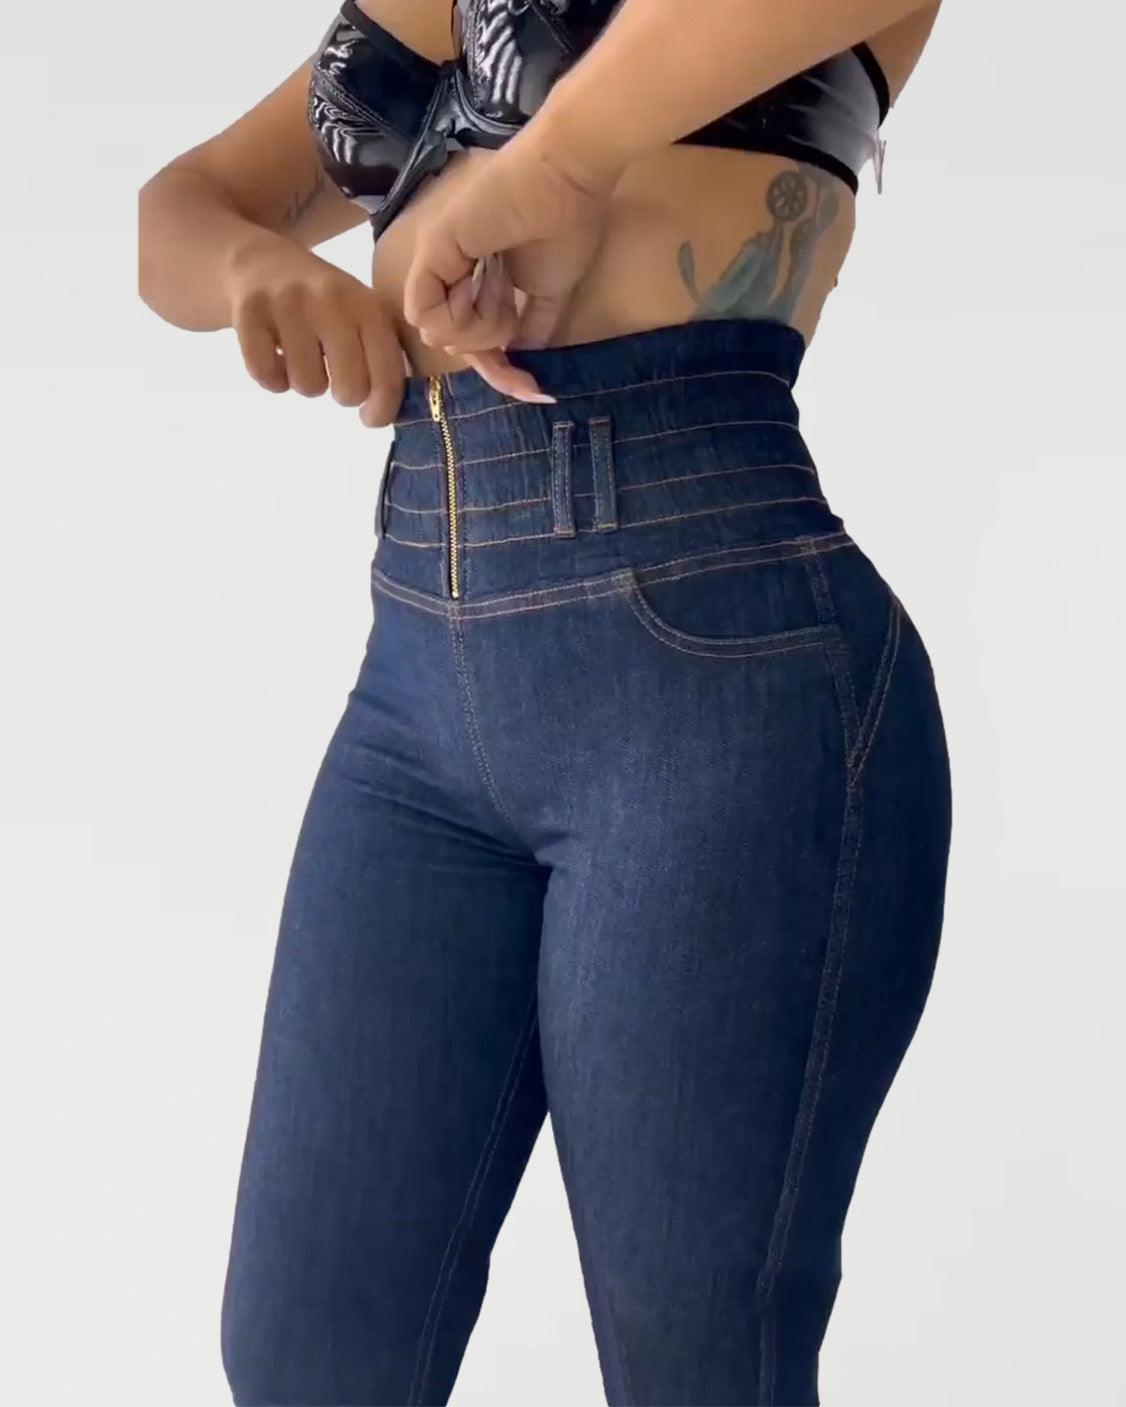 HIigh Waisted Front Zipper Stretchy Jeans - Wishe